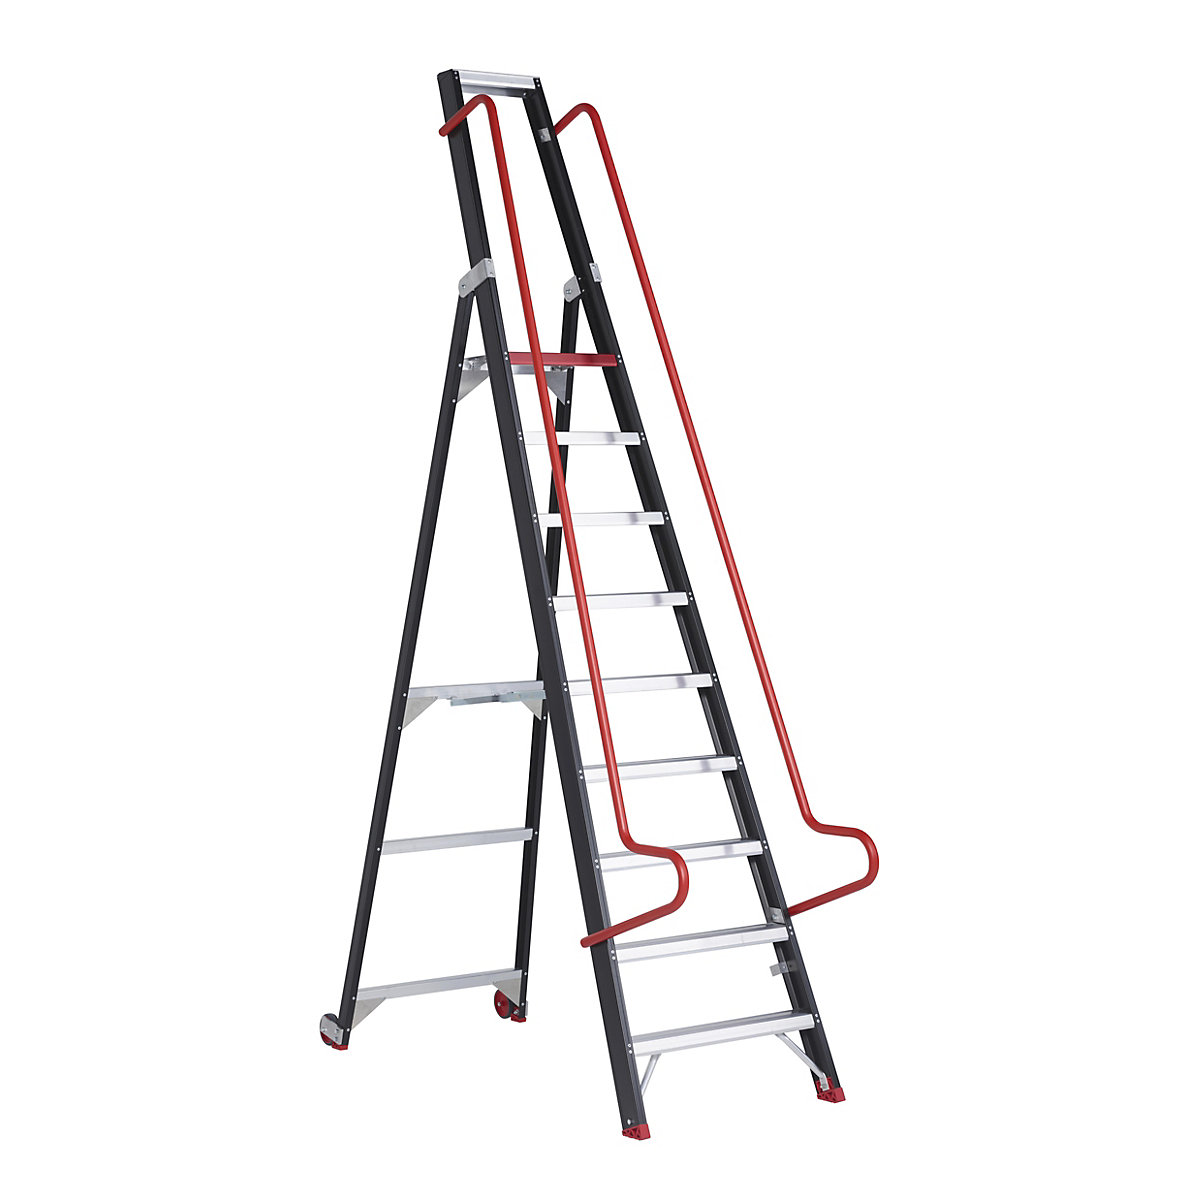 Mobile warehouse steps – Altrex, with safety hand rails, 9 steps incl. platform-8